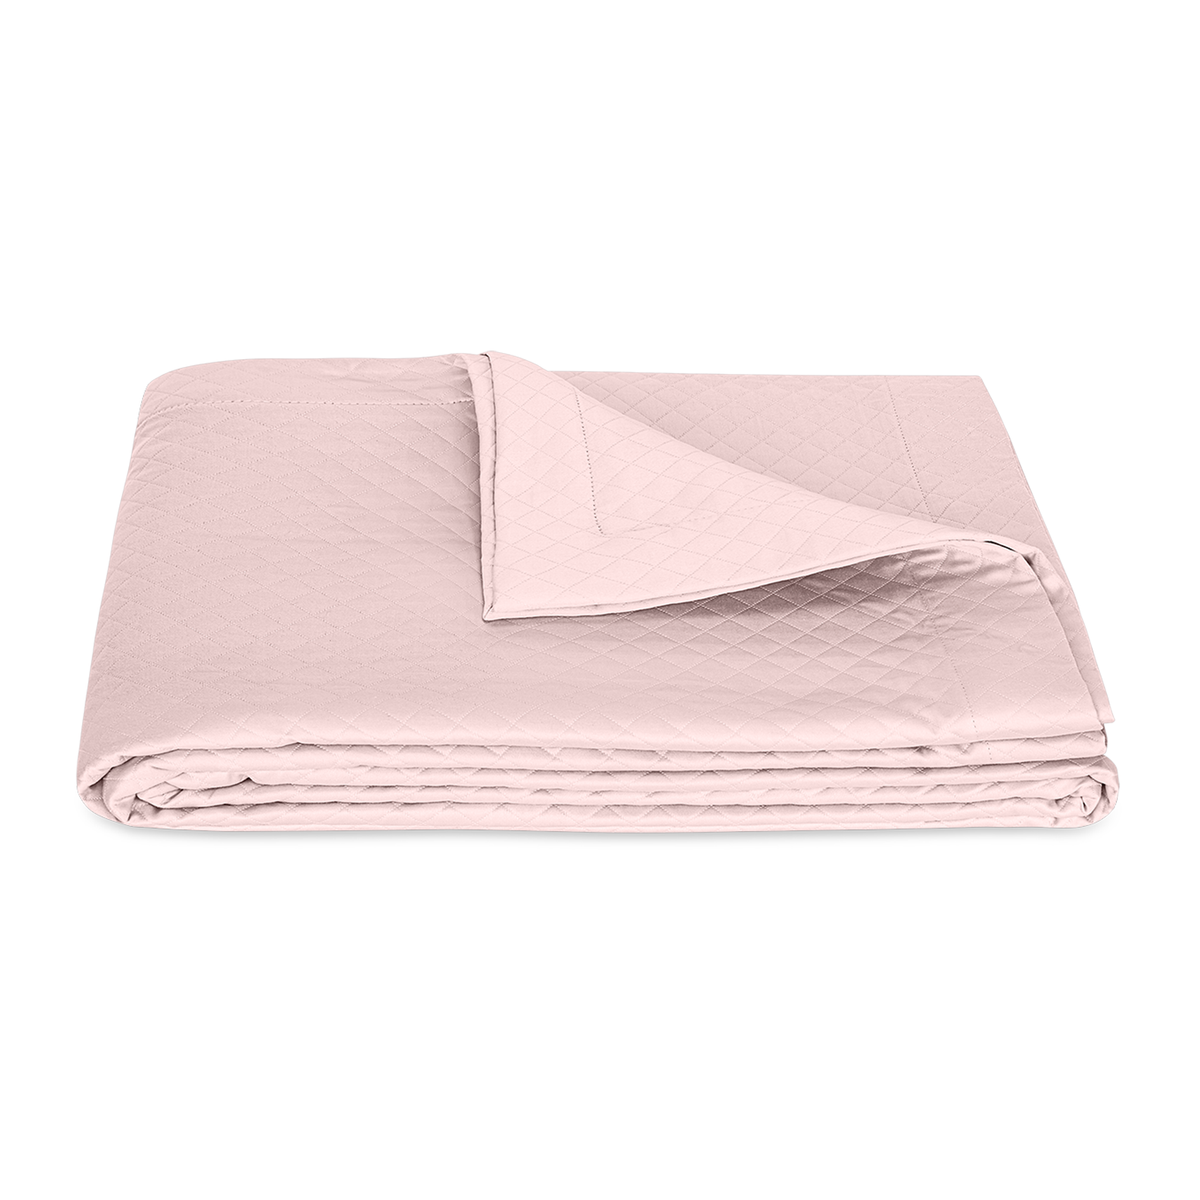 Folded Coverlet of Matouk Petra Bedding in Color Pink